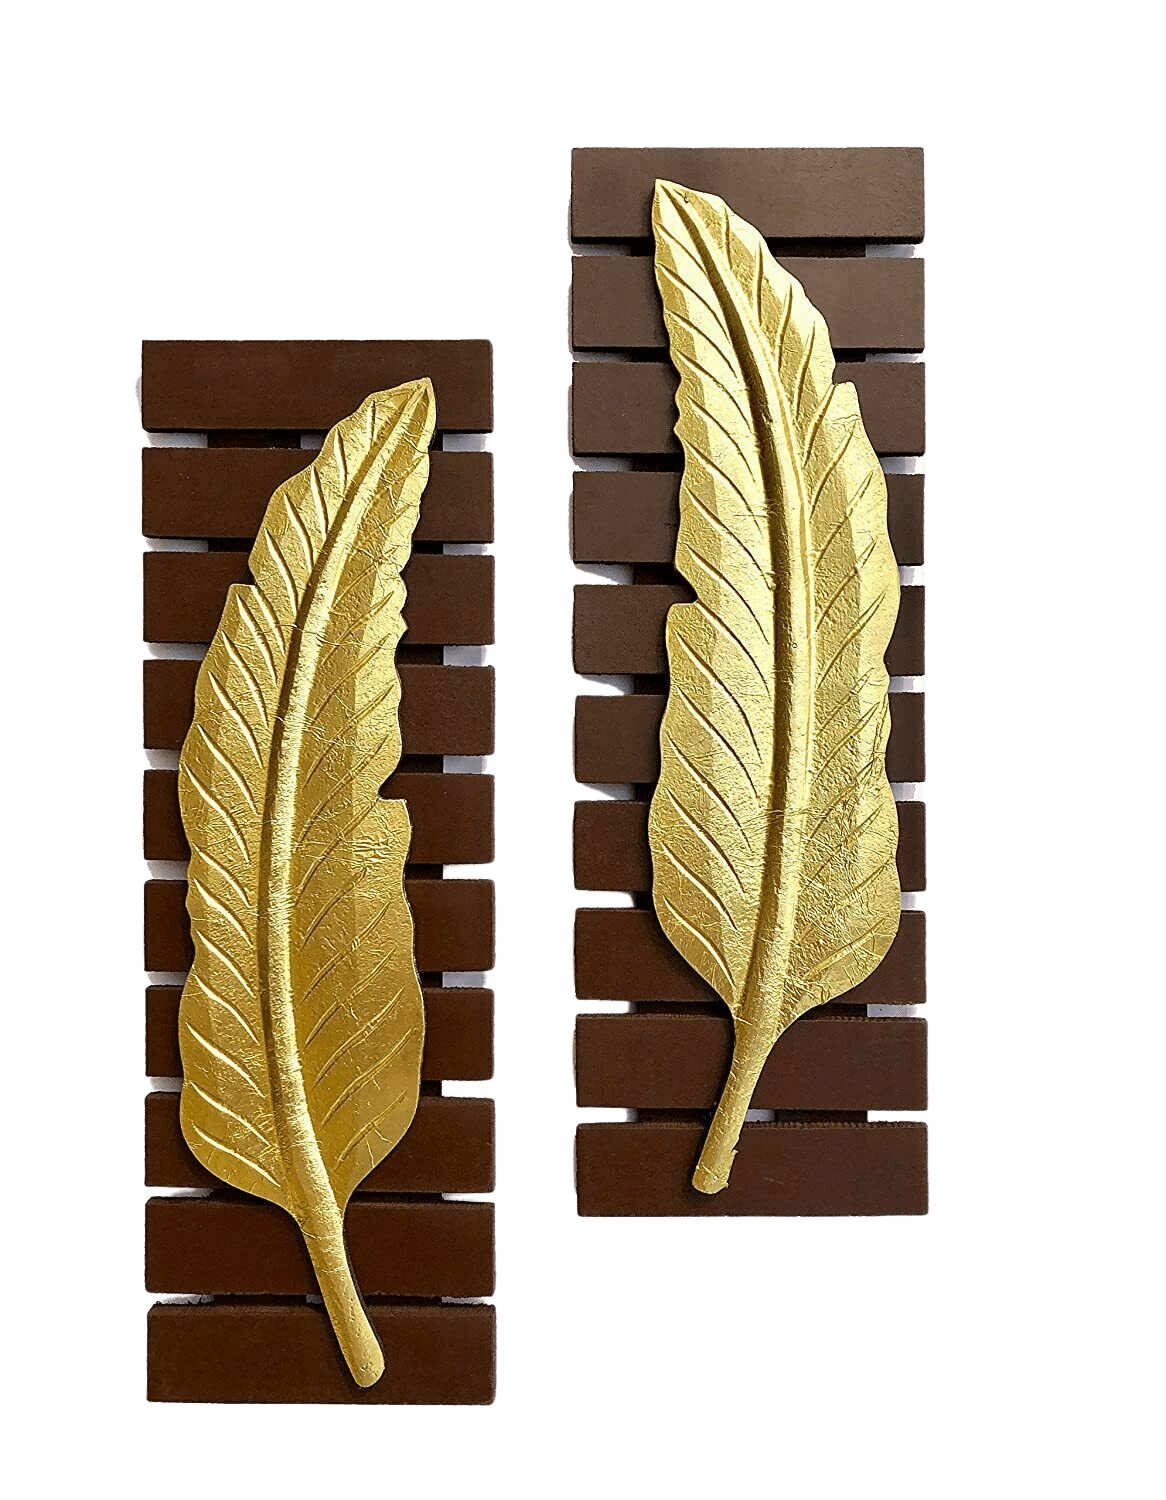 Tropical Brass Leaf Wall Decor Art Sculpture 6 x 18 inches Set of 2 - Home Decor Gifts and More